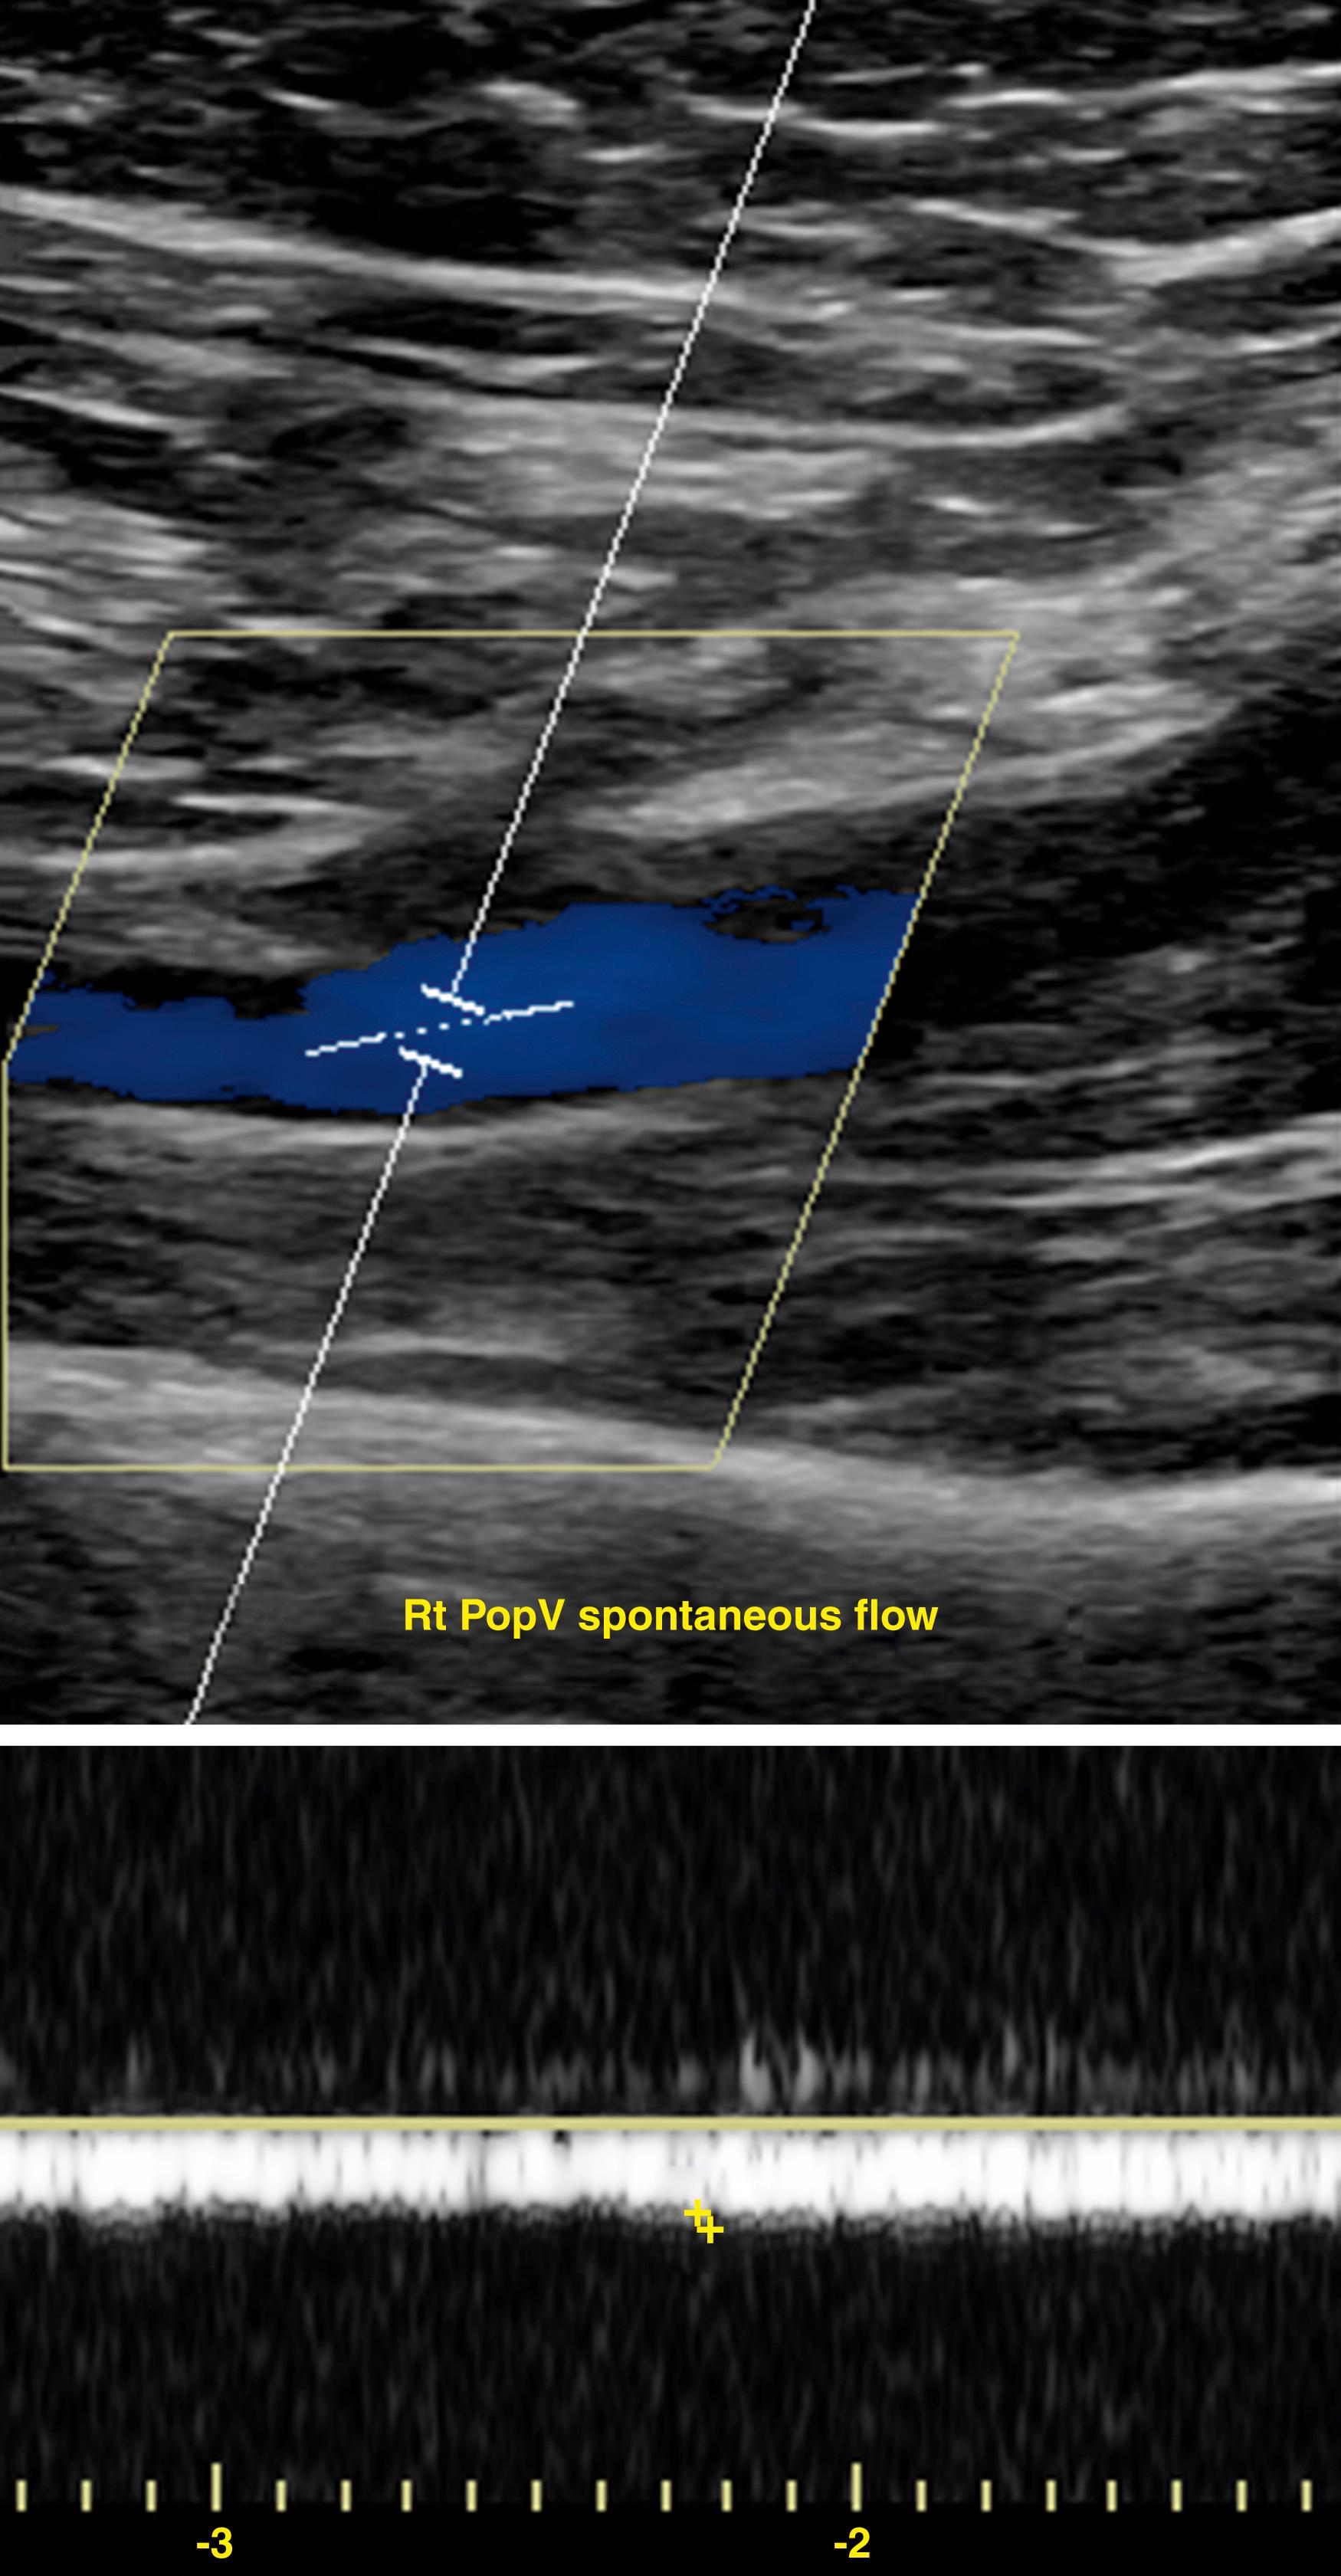 Figure 148.4, Duplex ultrasound image of popliteal vein in extremity with acute femoral–popliteal venous thrombosis during spontaneous flow. Color Doppler indicates the presence of the flow in the popliteal vein. The spectral Doppler demonstrates low-velocity continuous flow with lost phasicity (respiratory and cardiac) indicating more proximal obstruction.